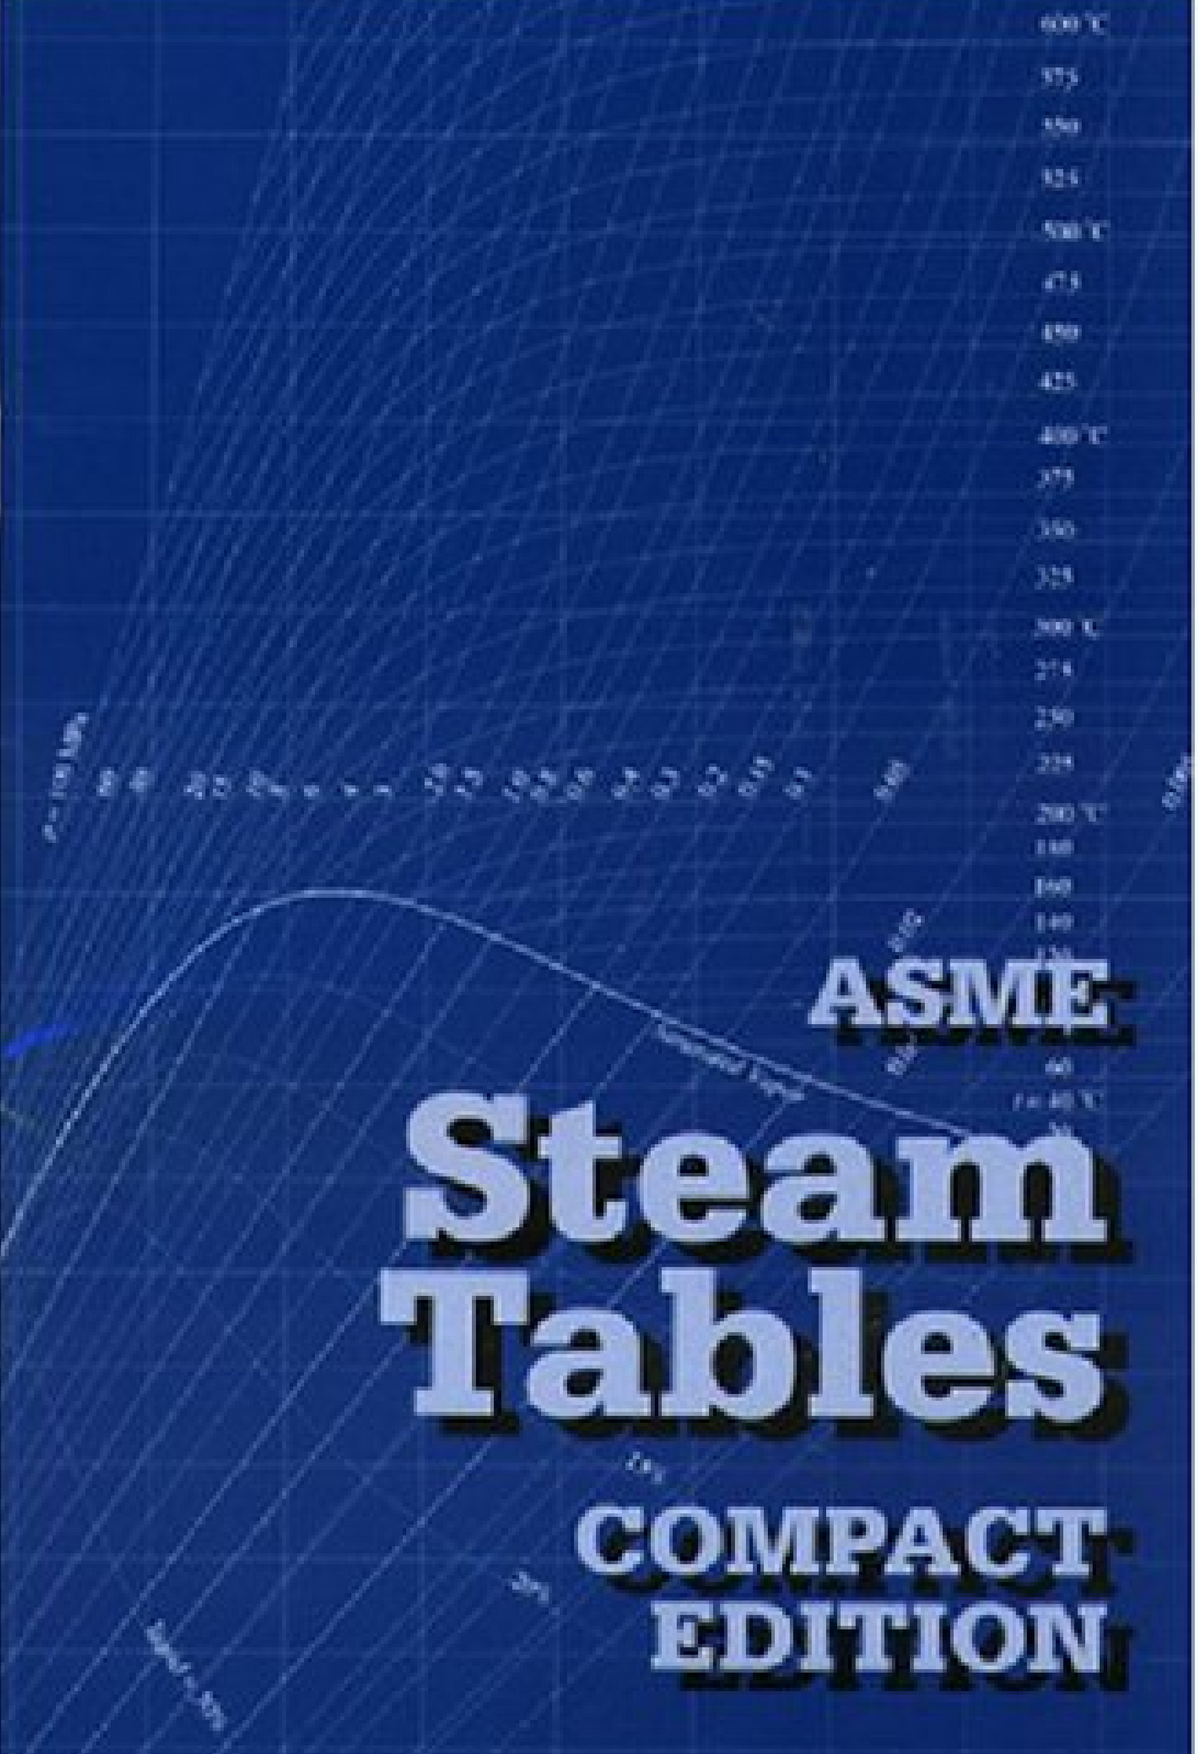 Steam table used to